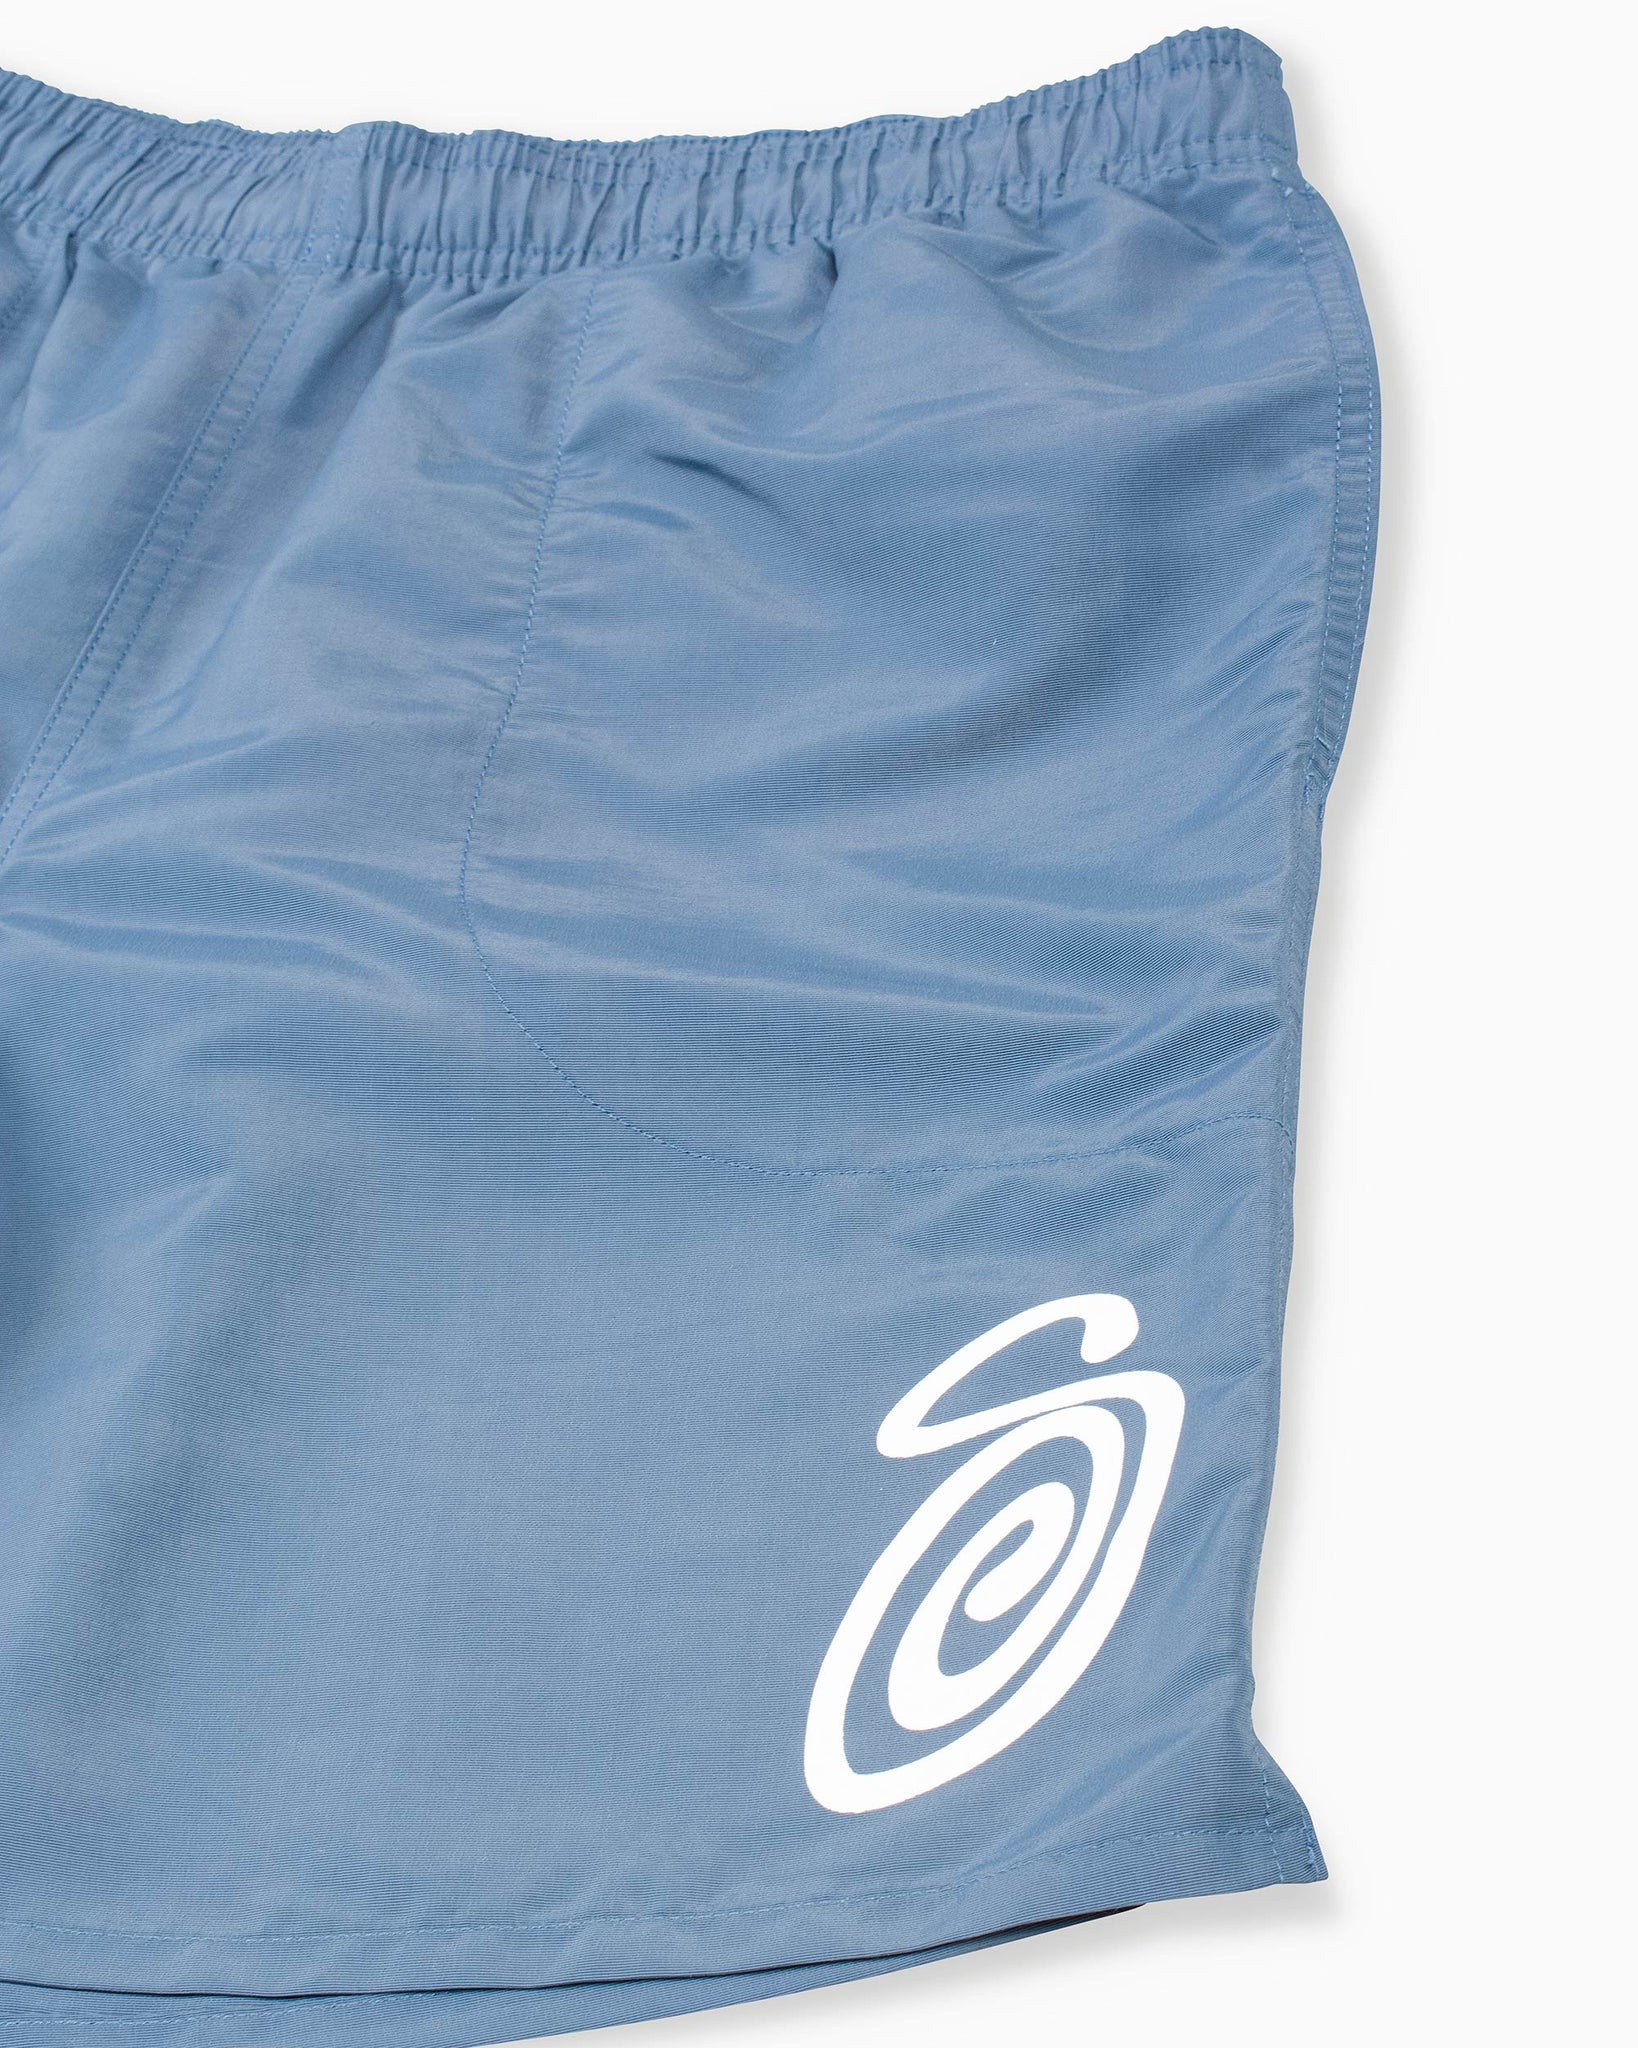 Stüssy Curly S Water Short Washed Navy Detail